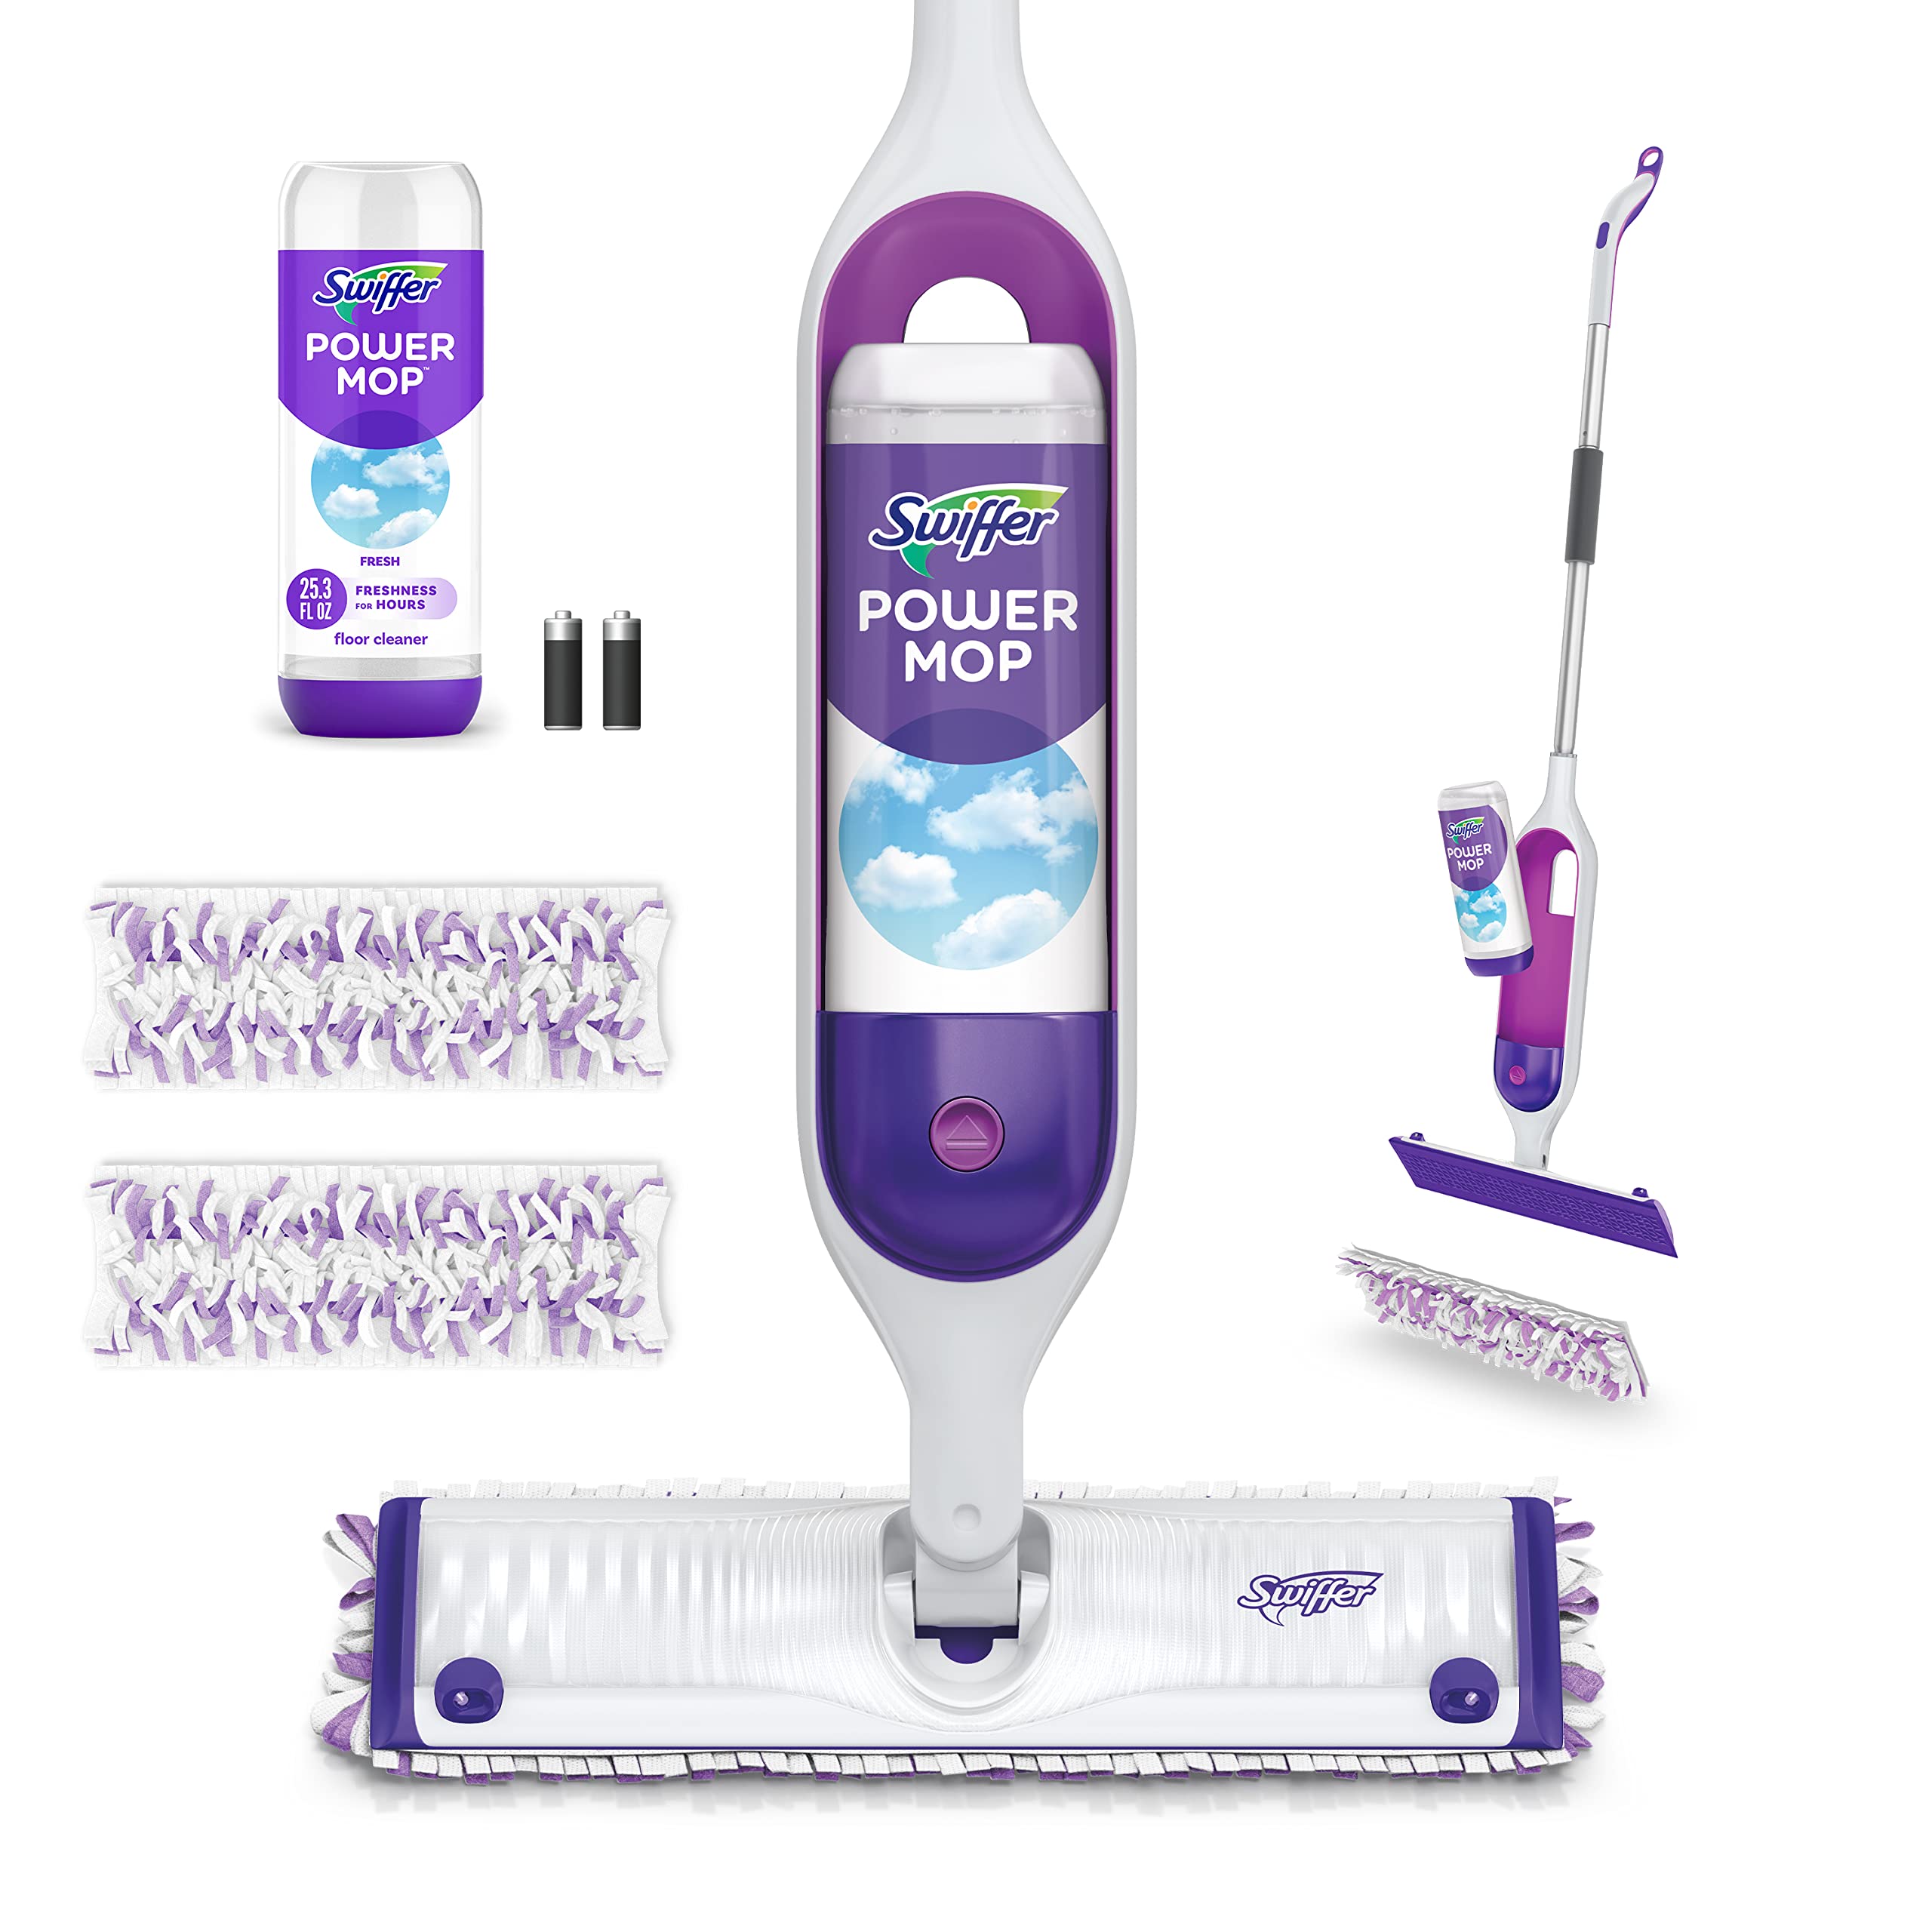 $22.44 /w S&S: Swiffer PowerMop Multi-Surface Mop Kit for Floor Cleaning